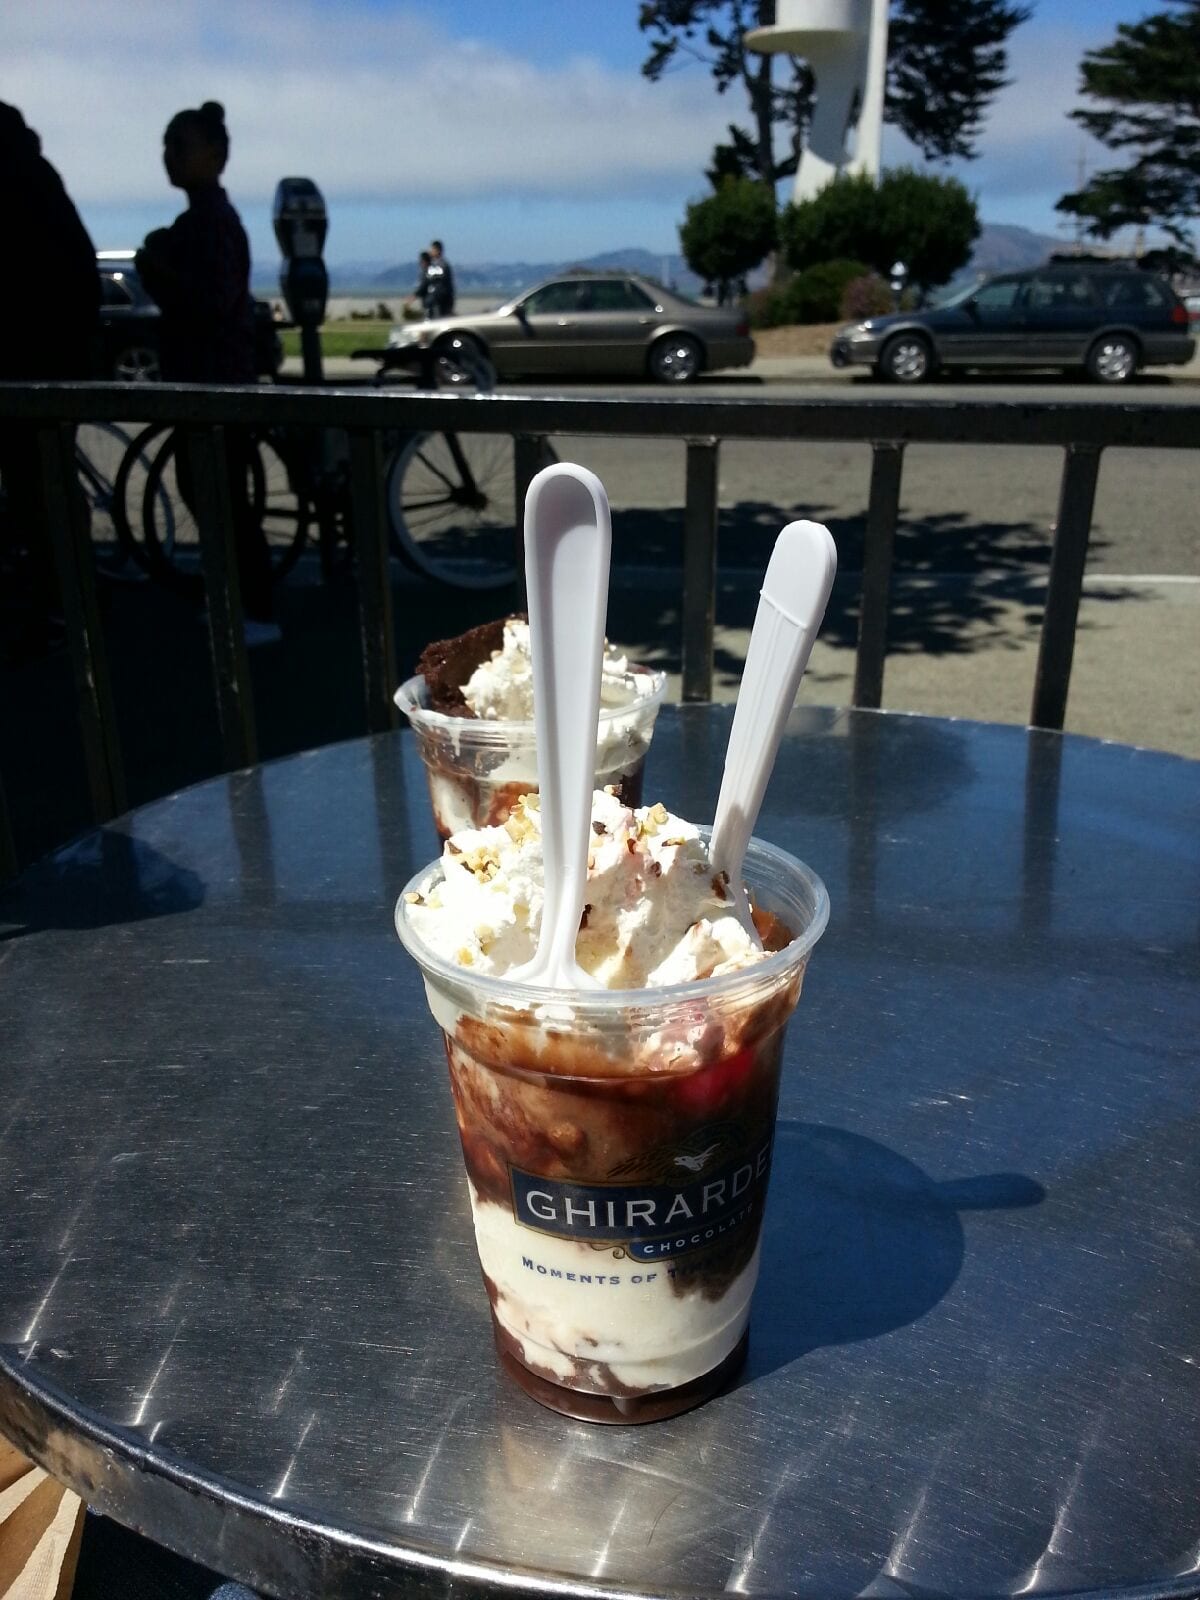 Top Things to do in San Francisco Ghirardelli Square